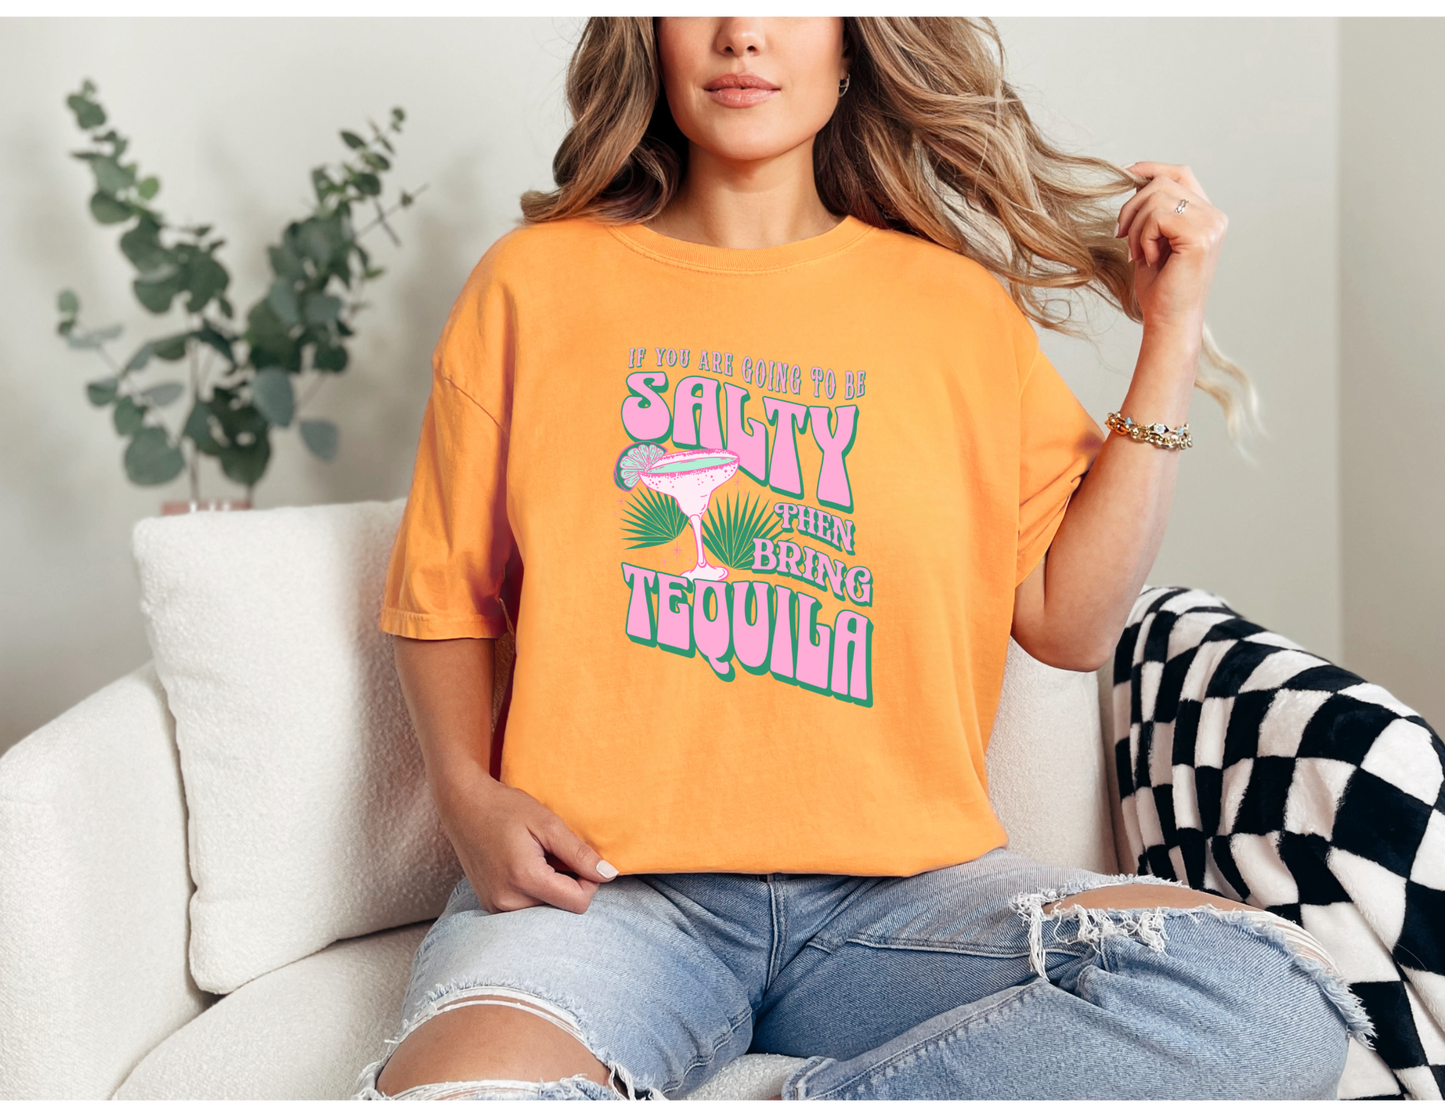 Salty Tequila Shirt